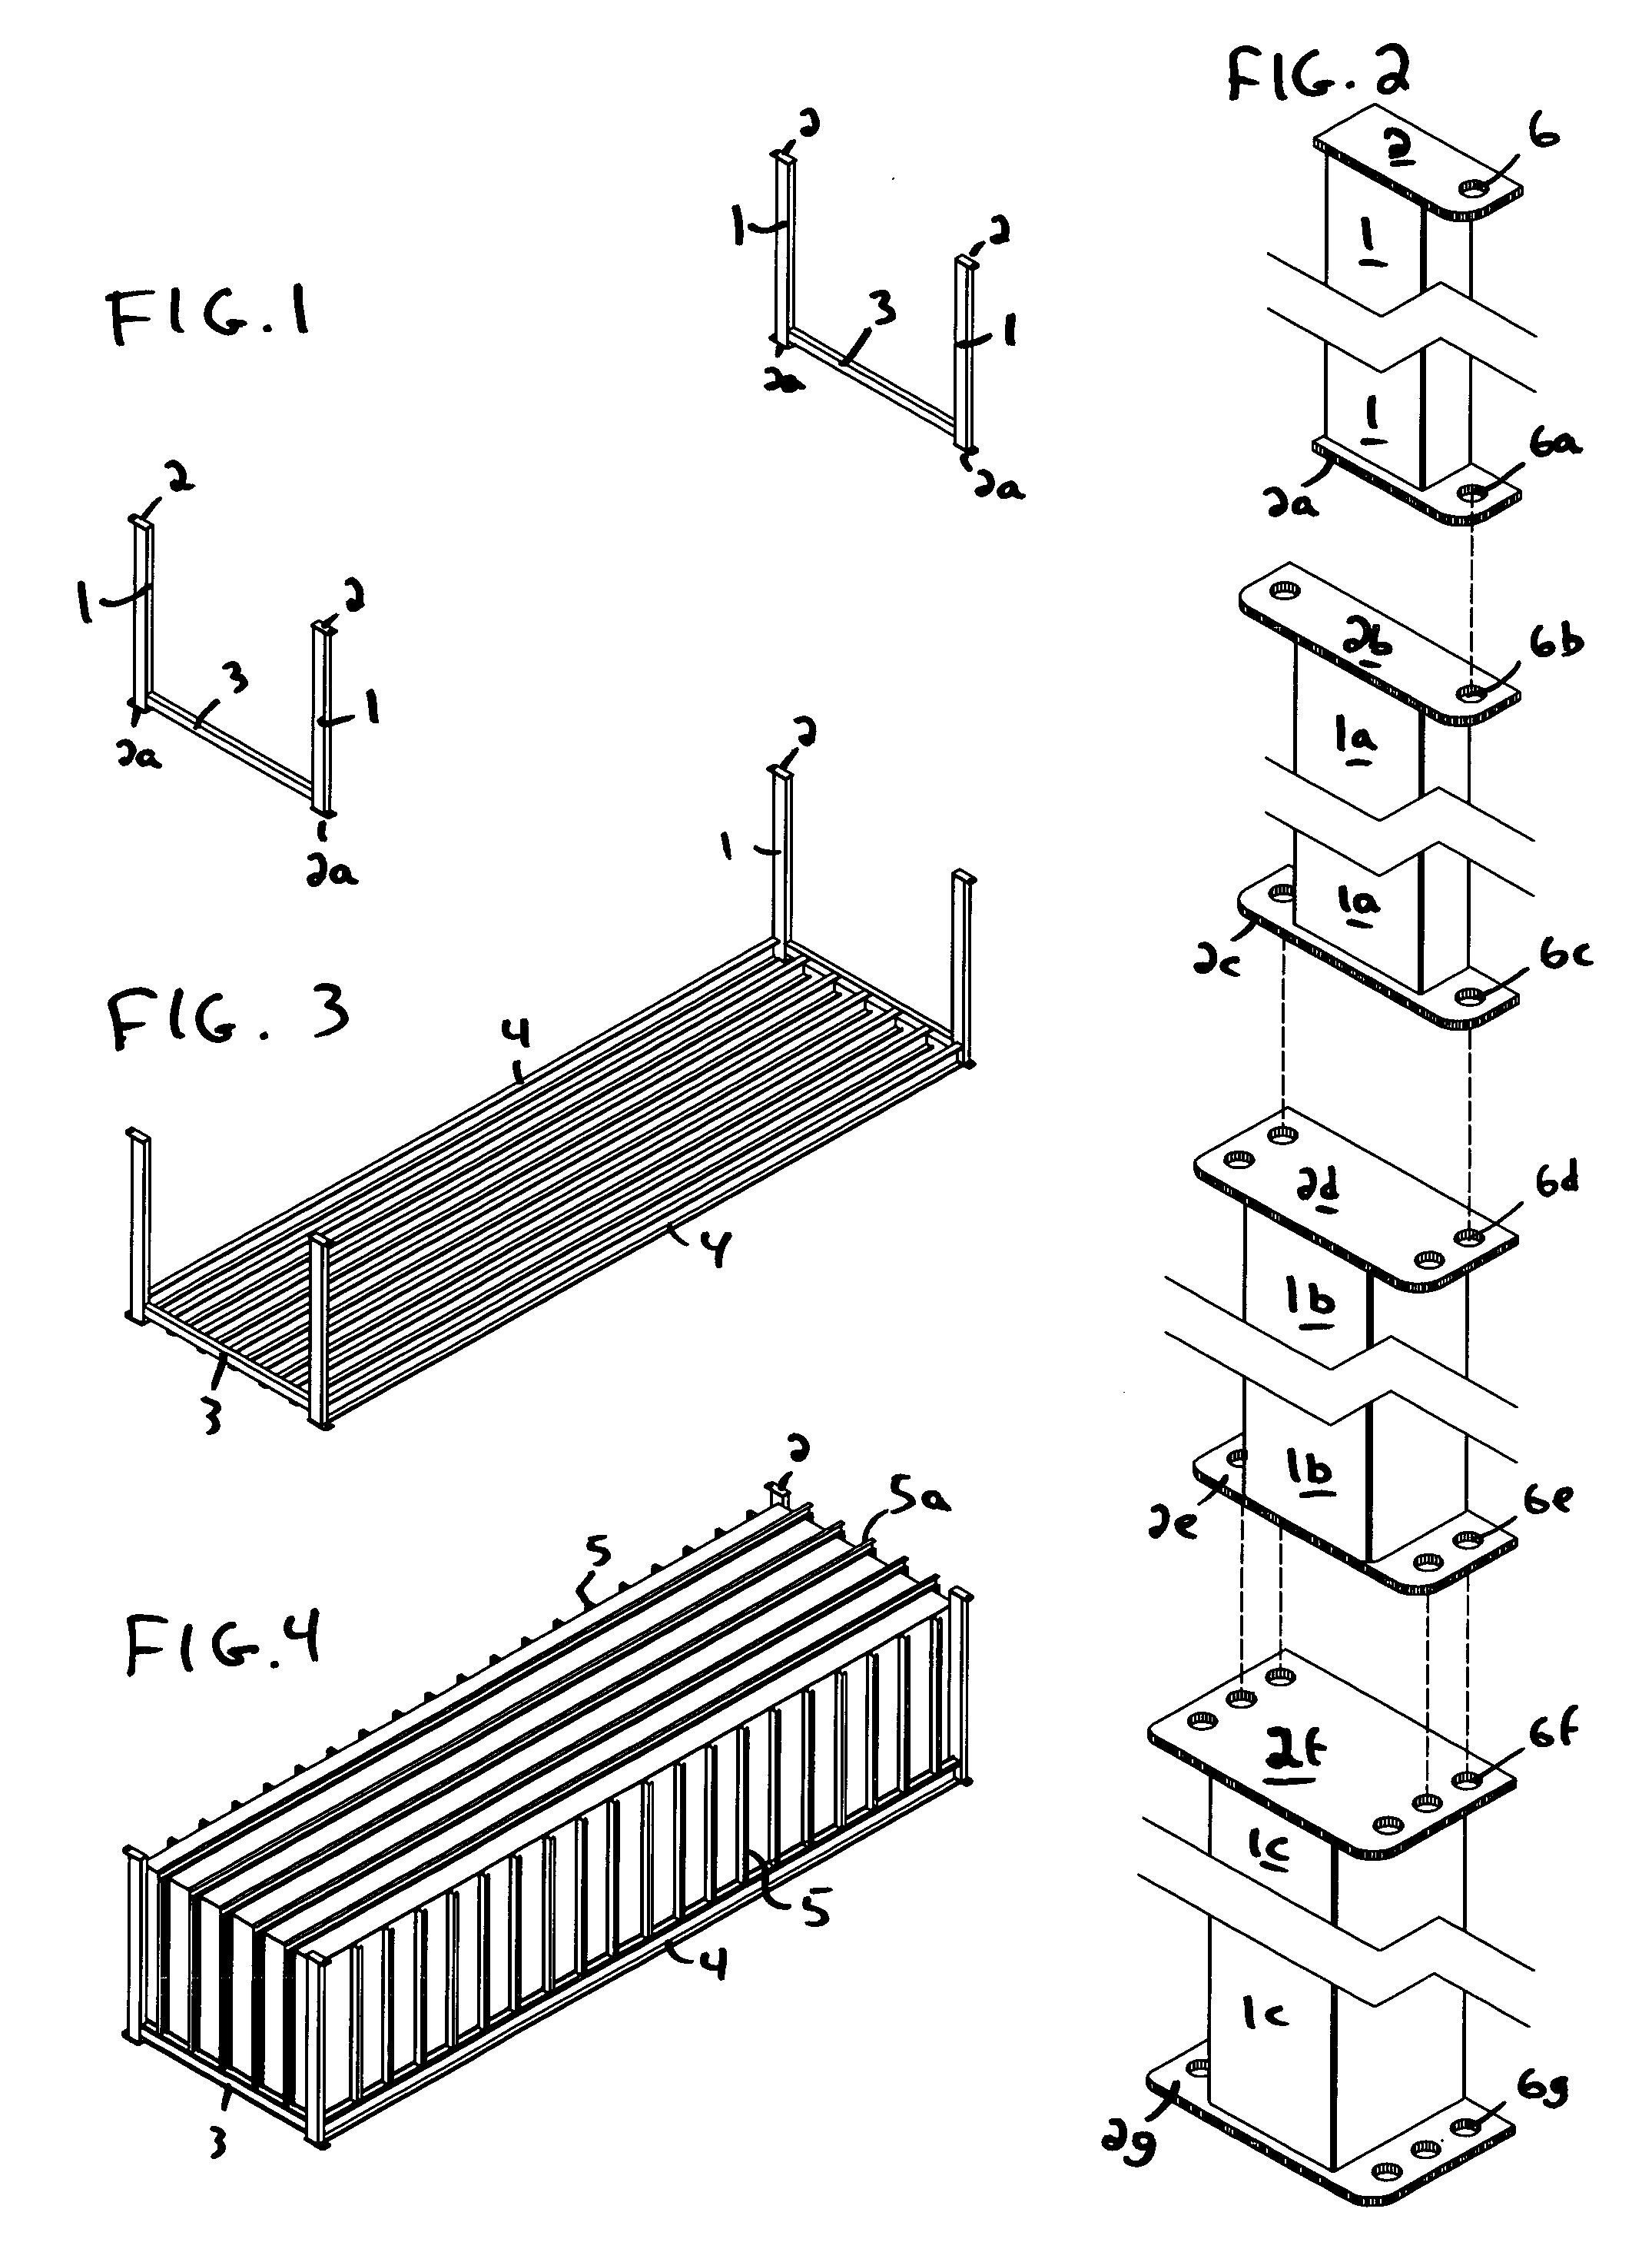 Load-bearing construction pod and hybrid method of construction using pods